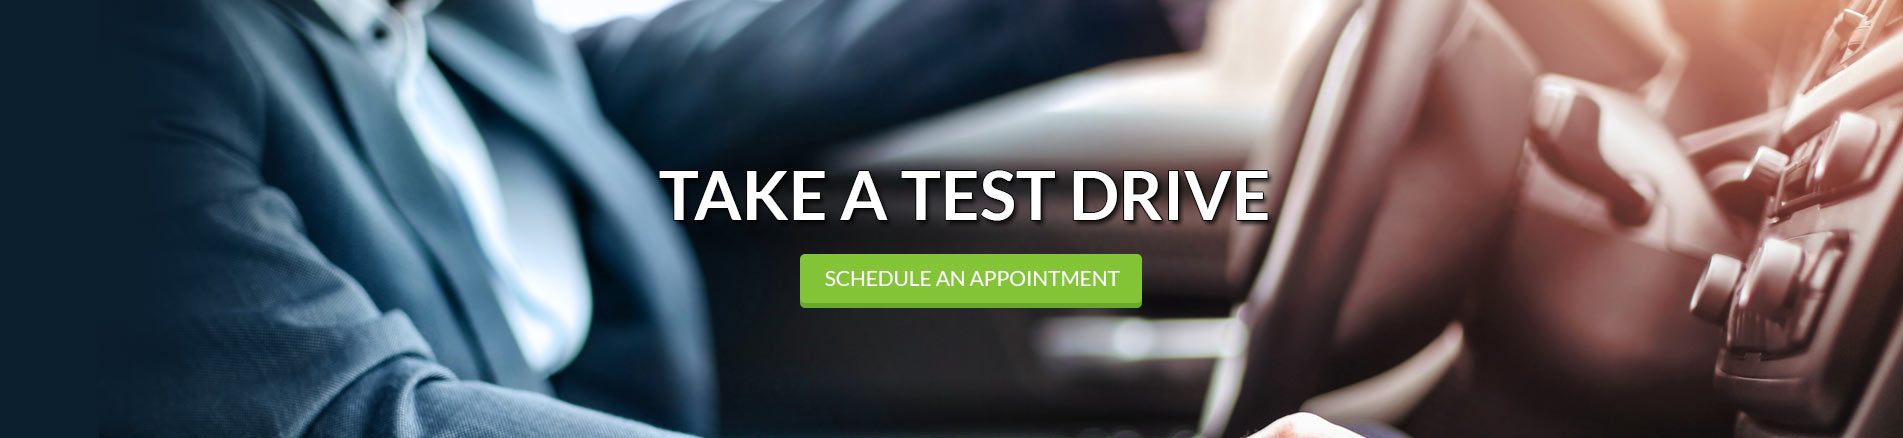 Schedule an appointment at King of Jamaica Auto Inc